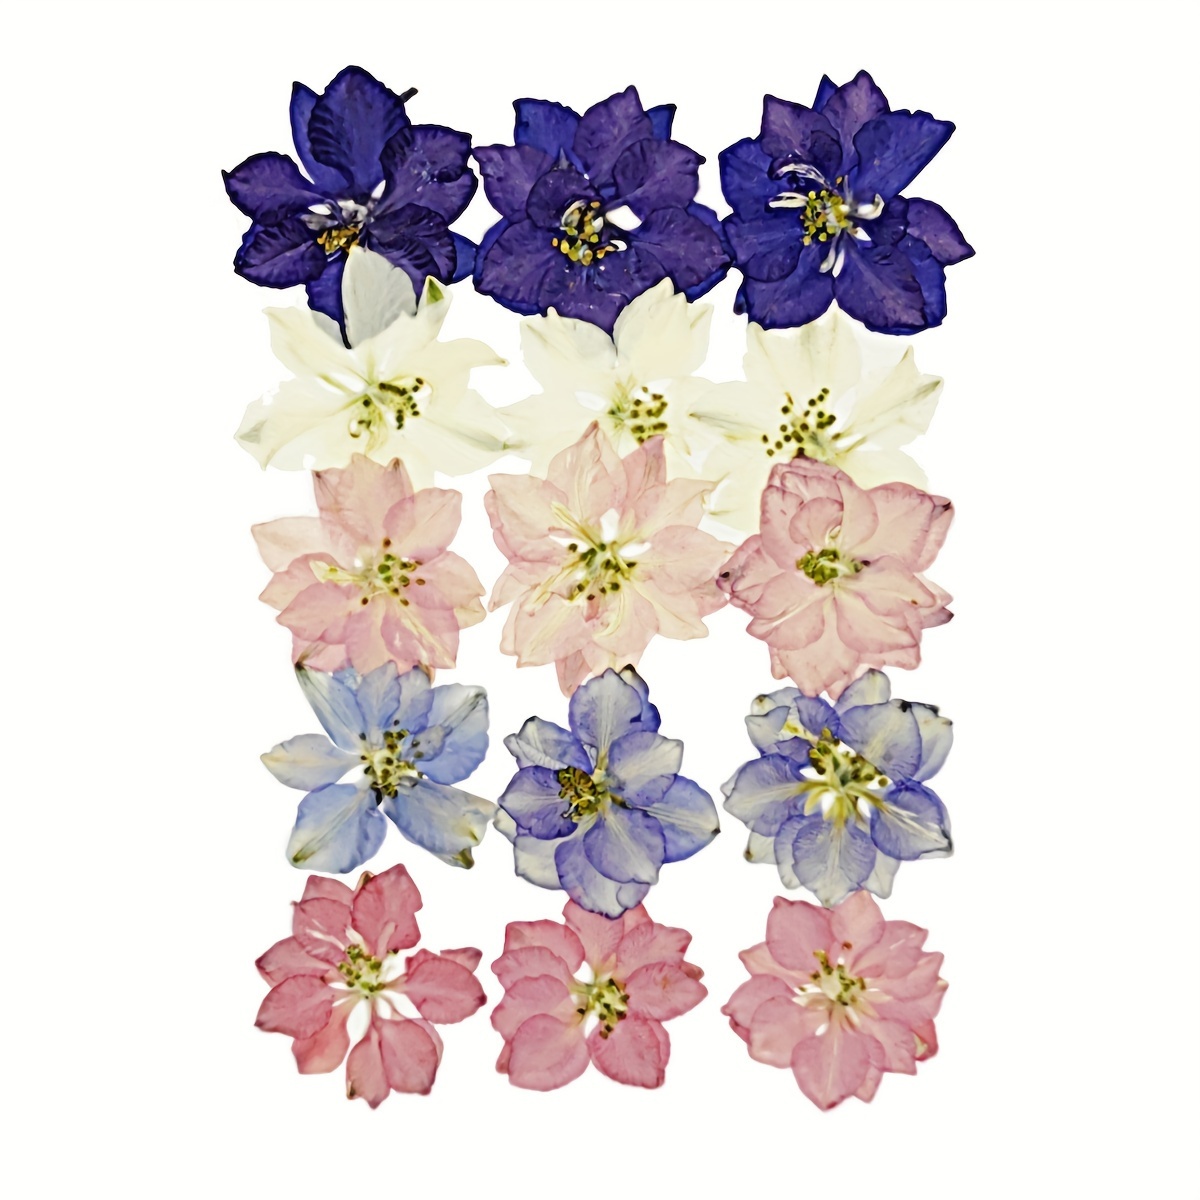 

15pcs Handmade Pressed Flowers, Used For Nail Art, Beauty, Resin Crafts, Candle Making, Diy Crafts, Etc.